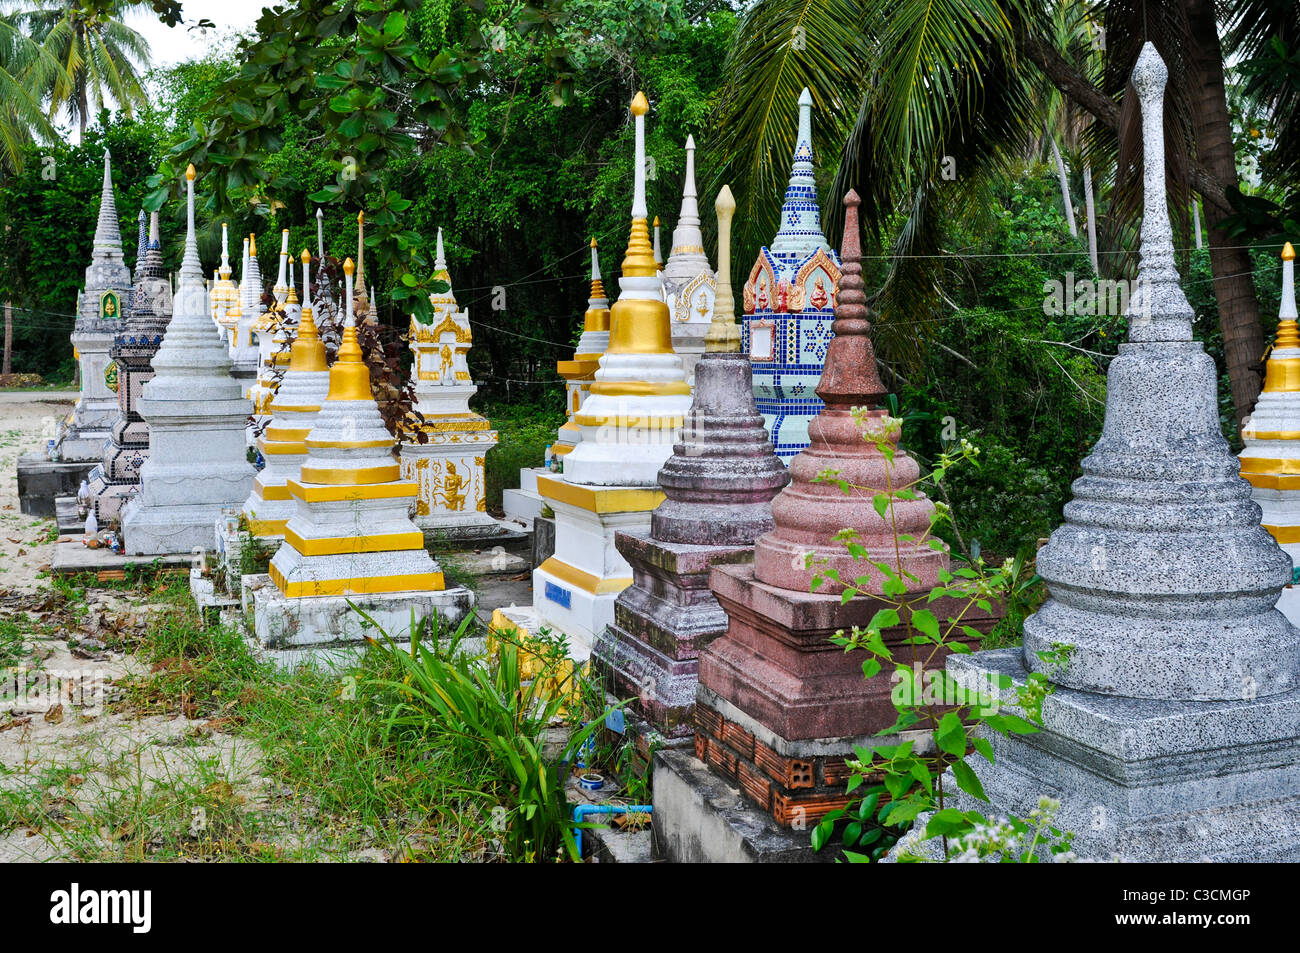 Many ornately shaped shrine stones, made out of everything from stone to tile and decorated with paint, metal or tiles. Stock Photo